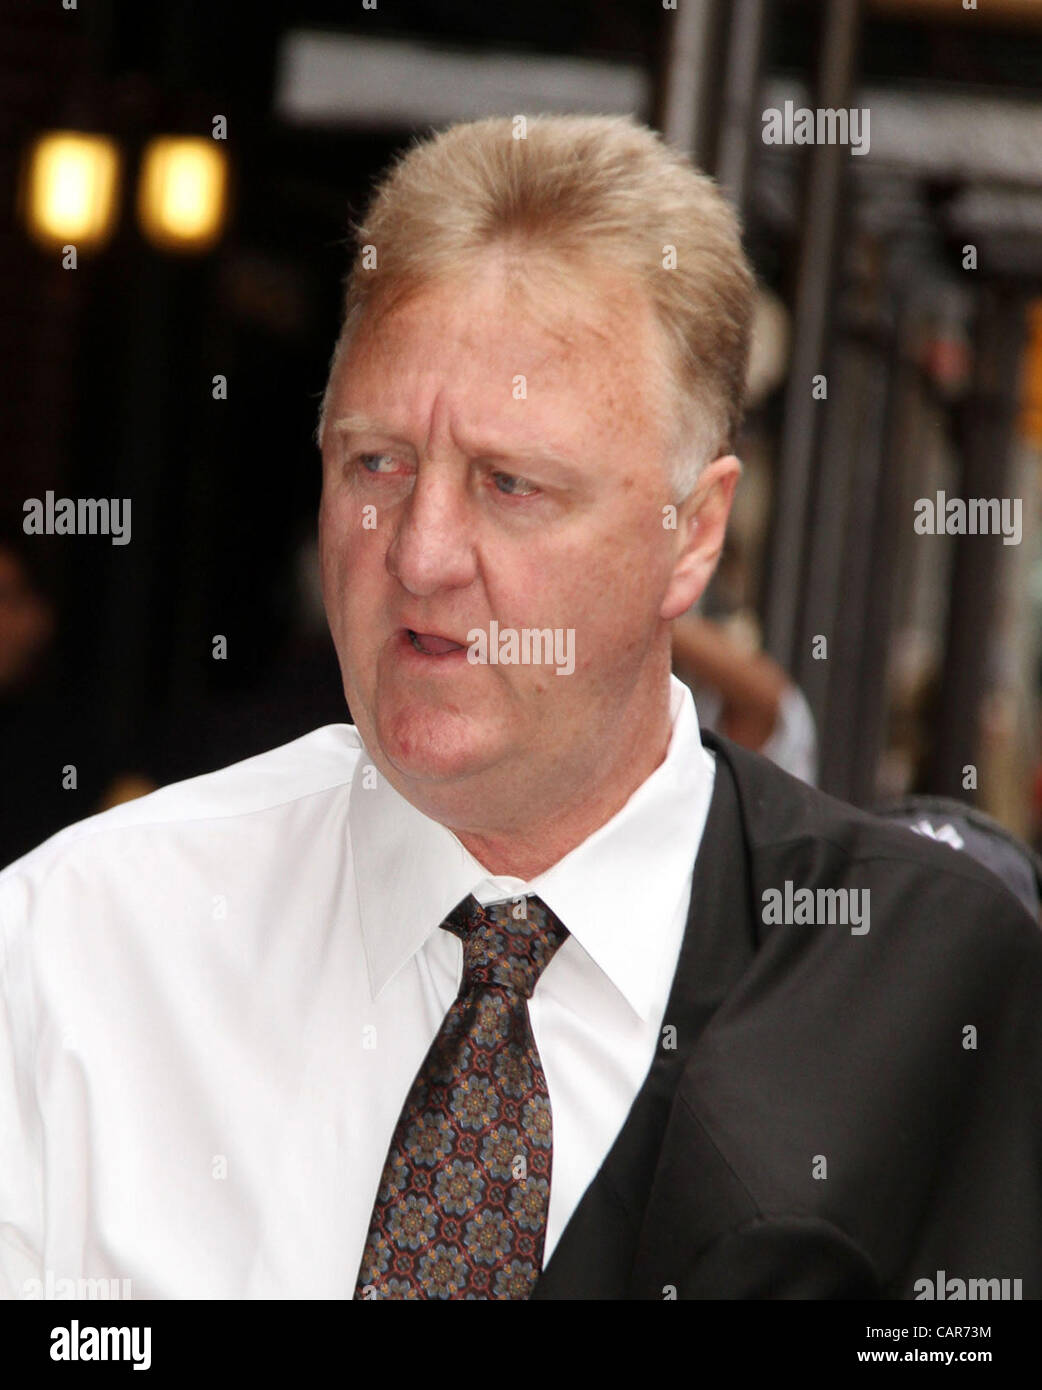 April 11, 2012 - New York, New York, U.S. - Former basketball player LARRY BIRD arrives for his appearance on 'The Late Show With David Letterman' held at the Ed Sullivan Theater. (Credit Image: © Nancy Kaszerman/ZUMAPRESS.com) Stock Photo